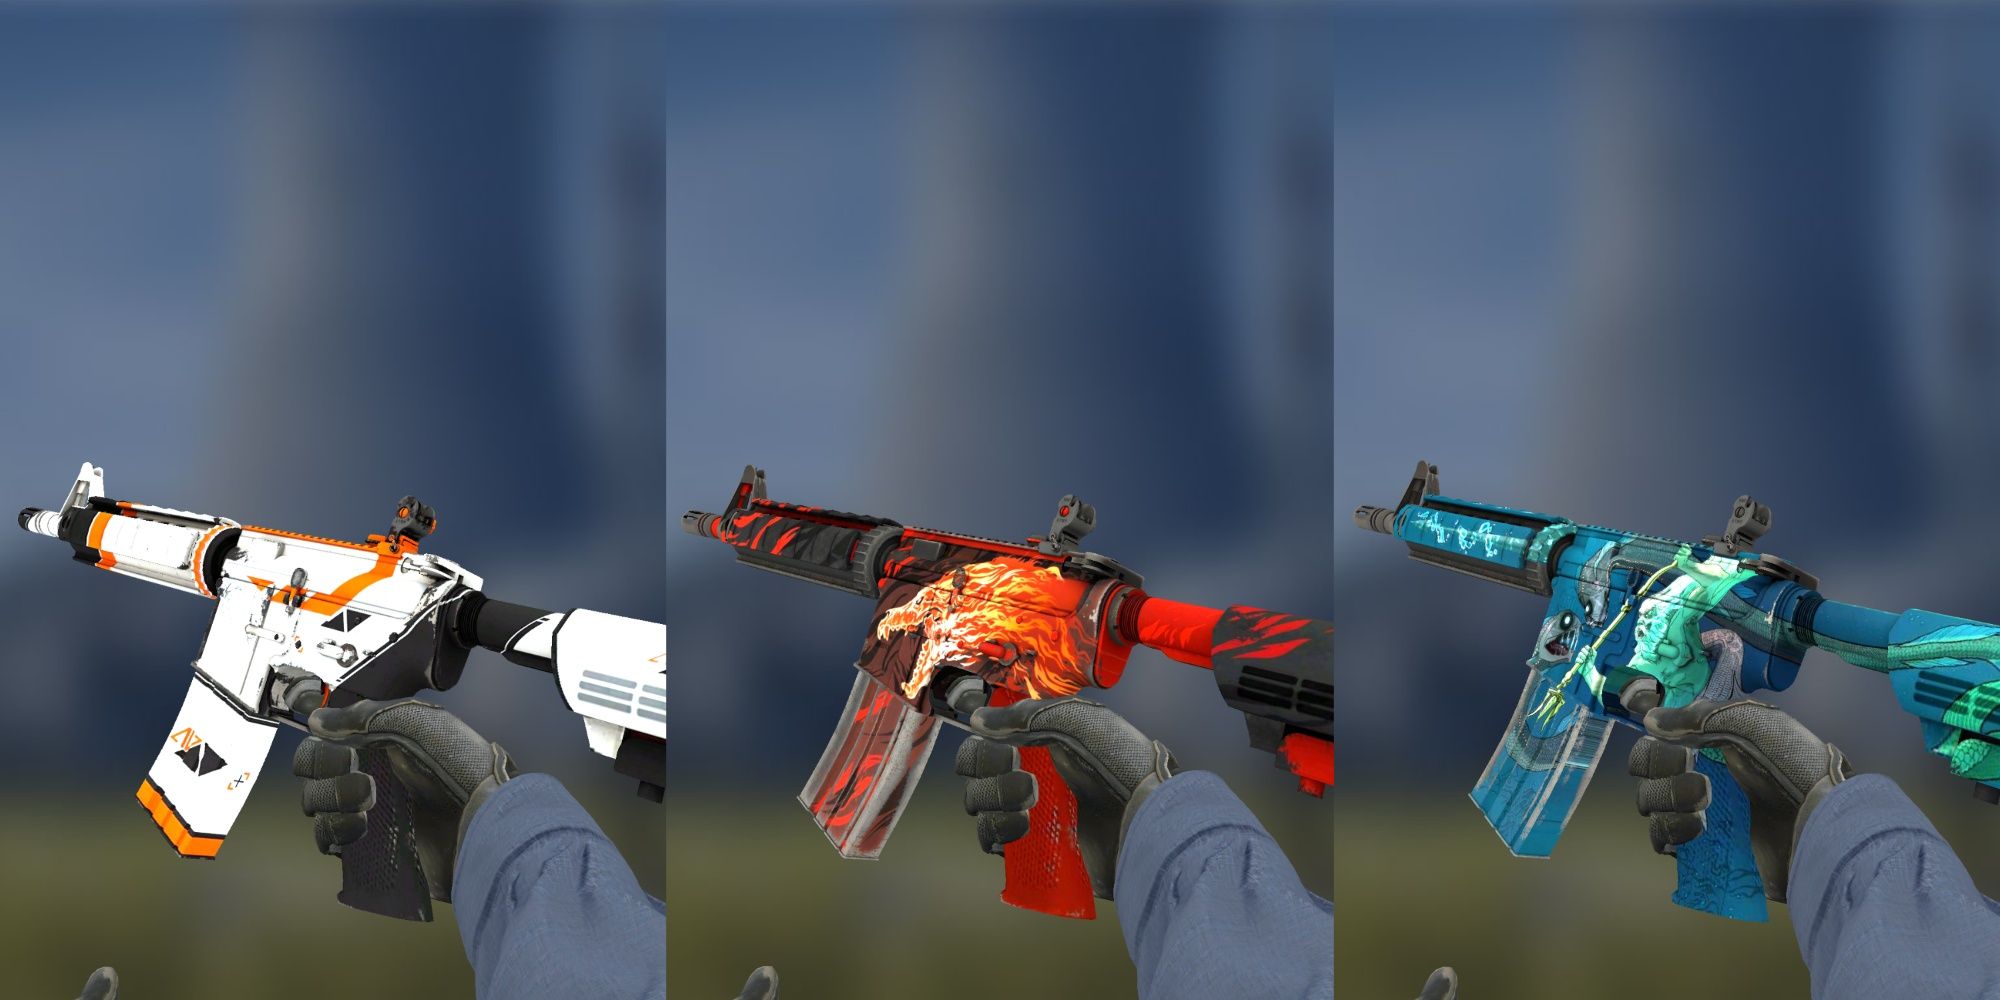 Collage image of M4A1 Skins featuring the M4A1 Asiimov, Howl, and Poseidon in CS:GO.